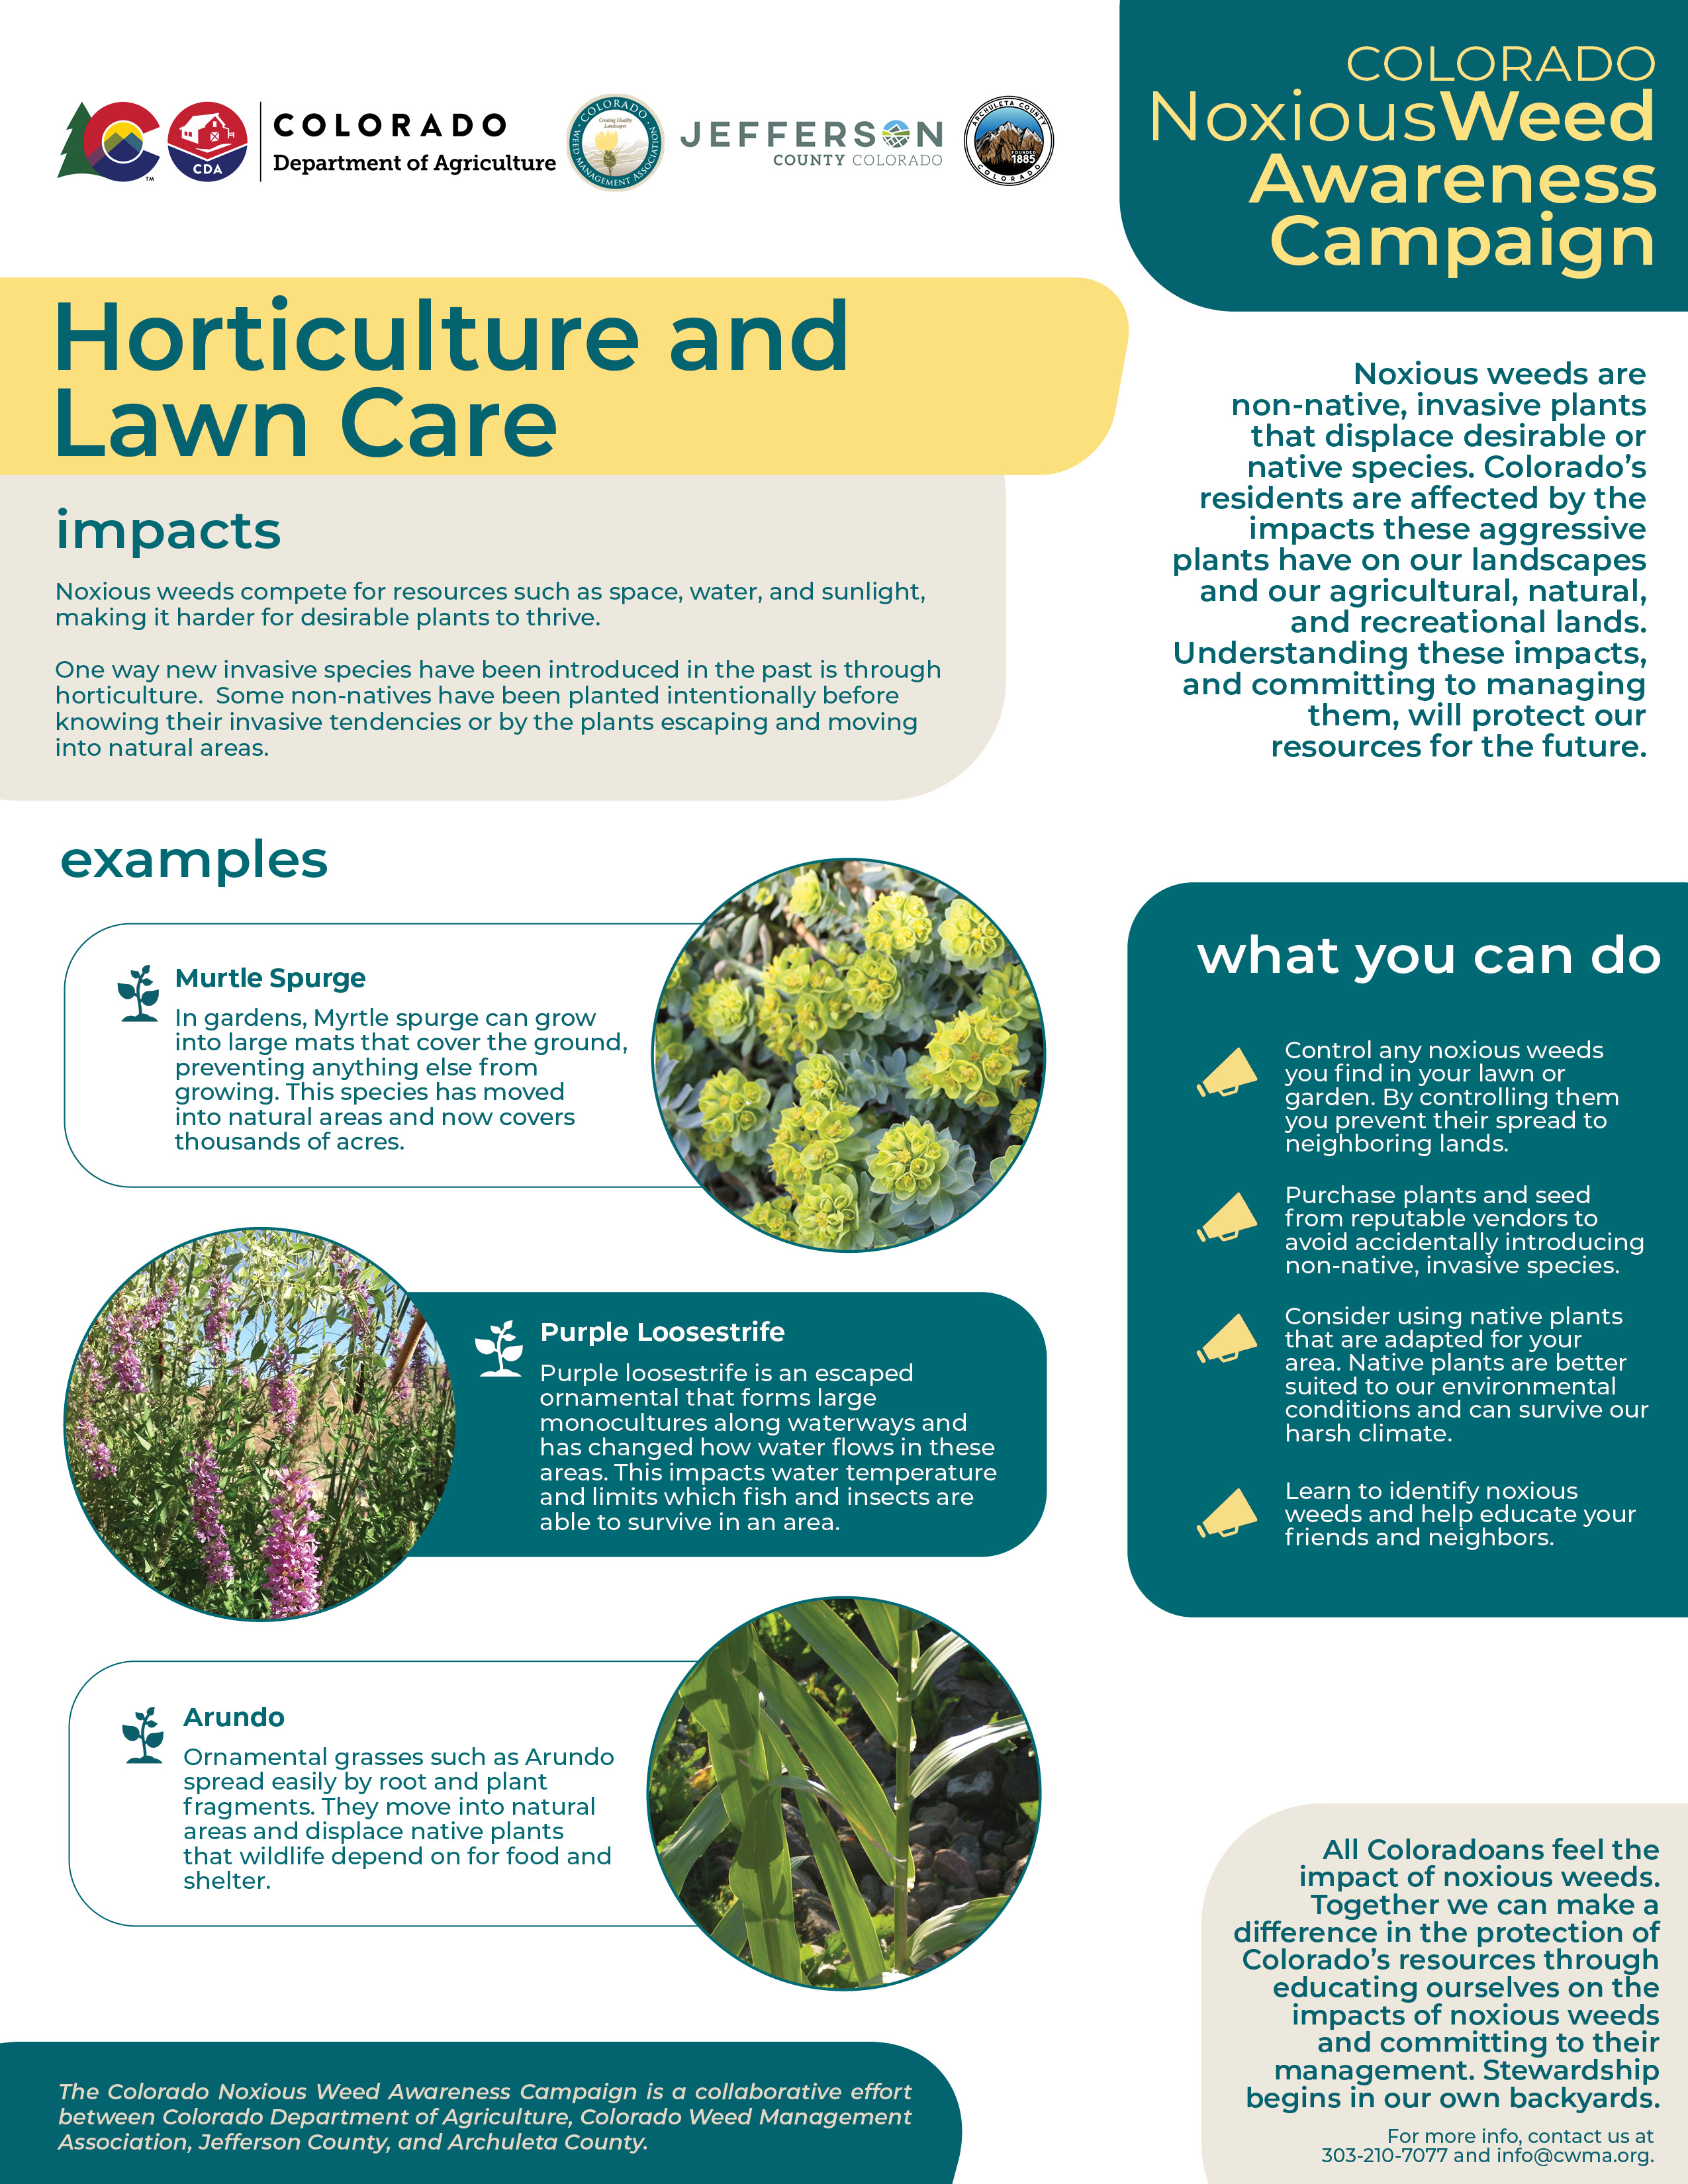 Graphic with information about impacts of noxious weeds on horticulture and landscape.